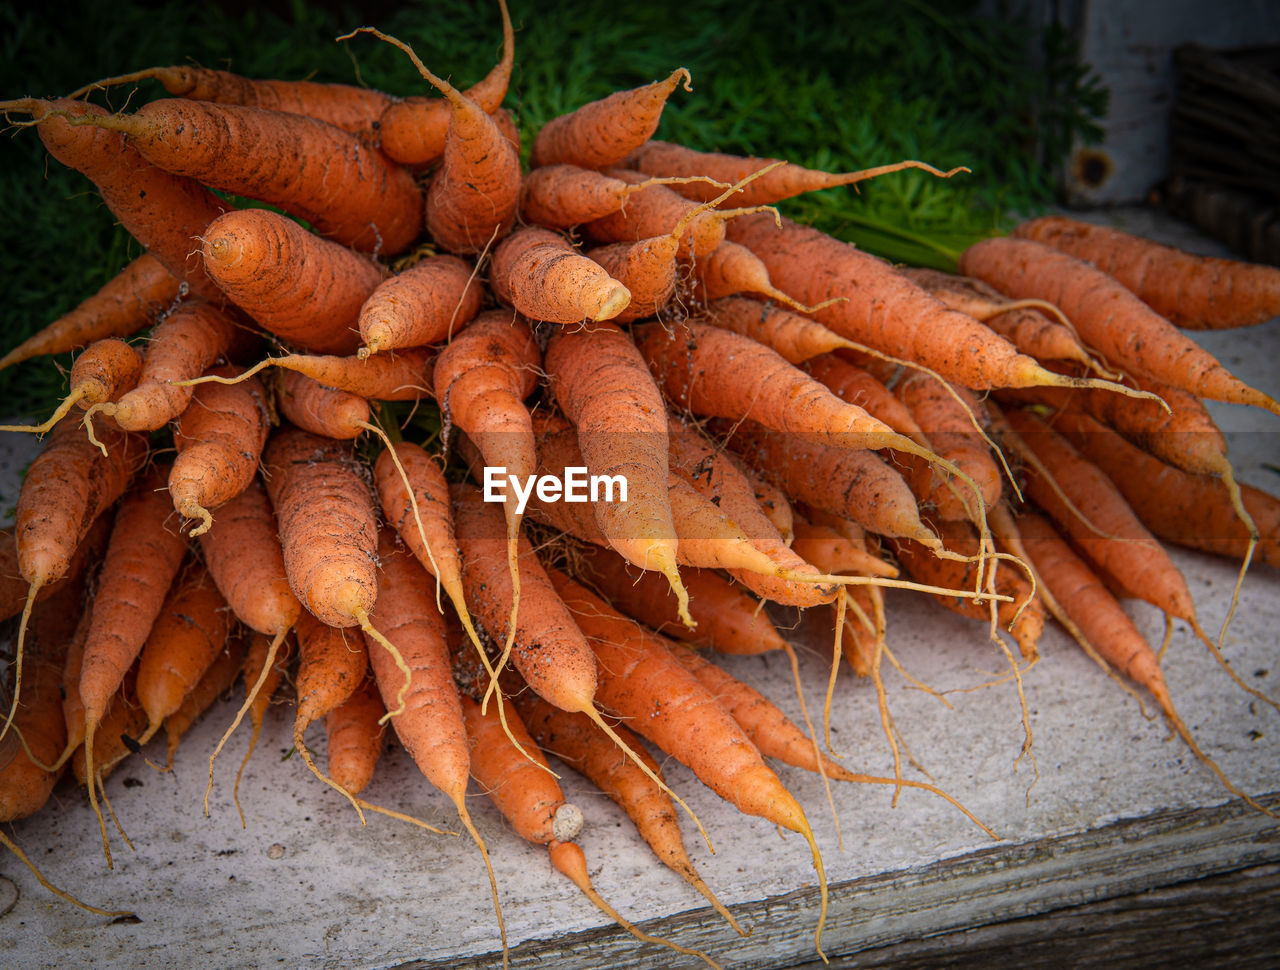 HIGH ANGLE VIEW OF CARROTS IN MARKET